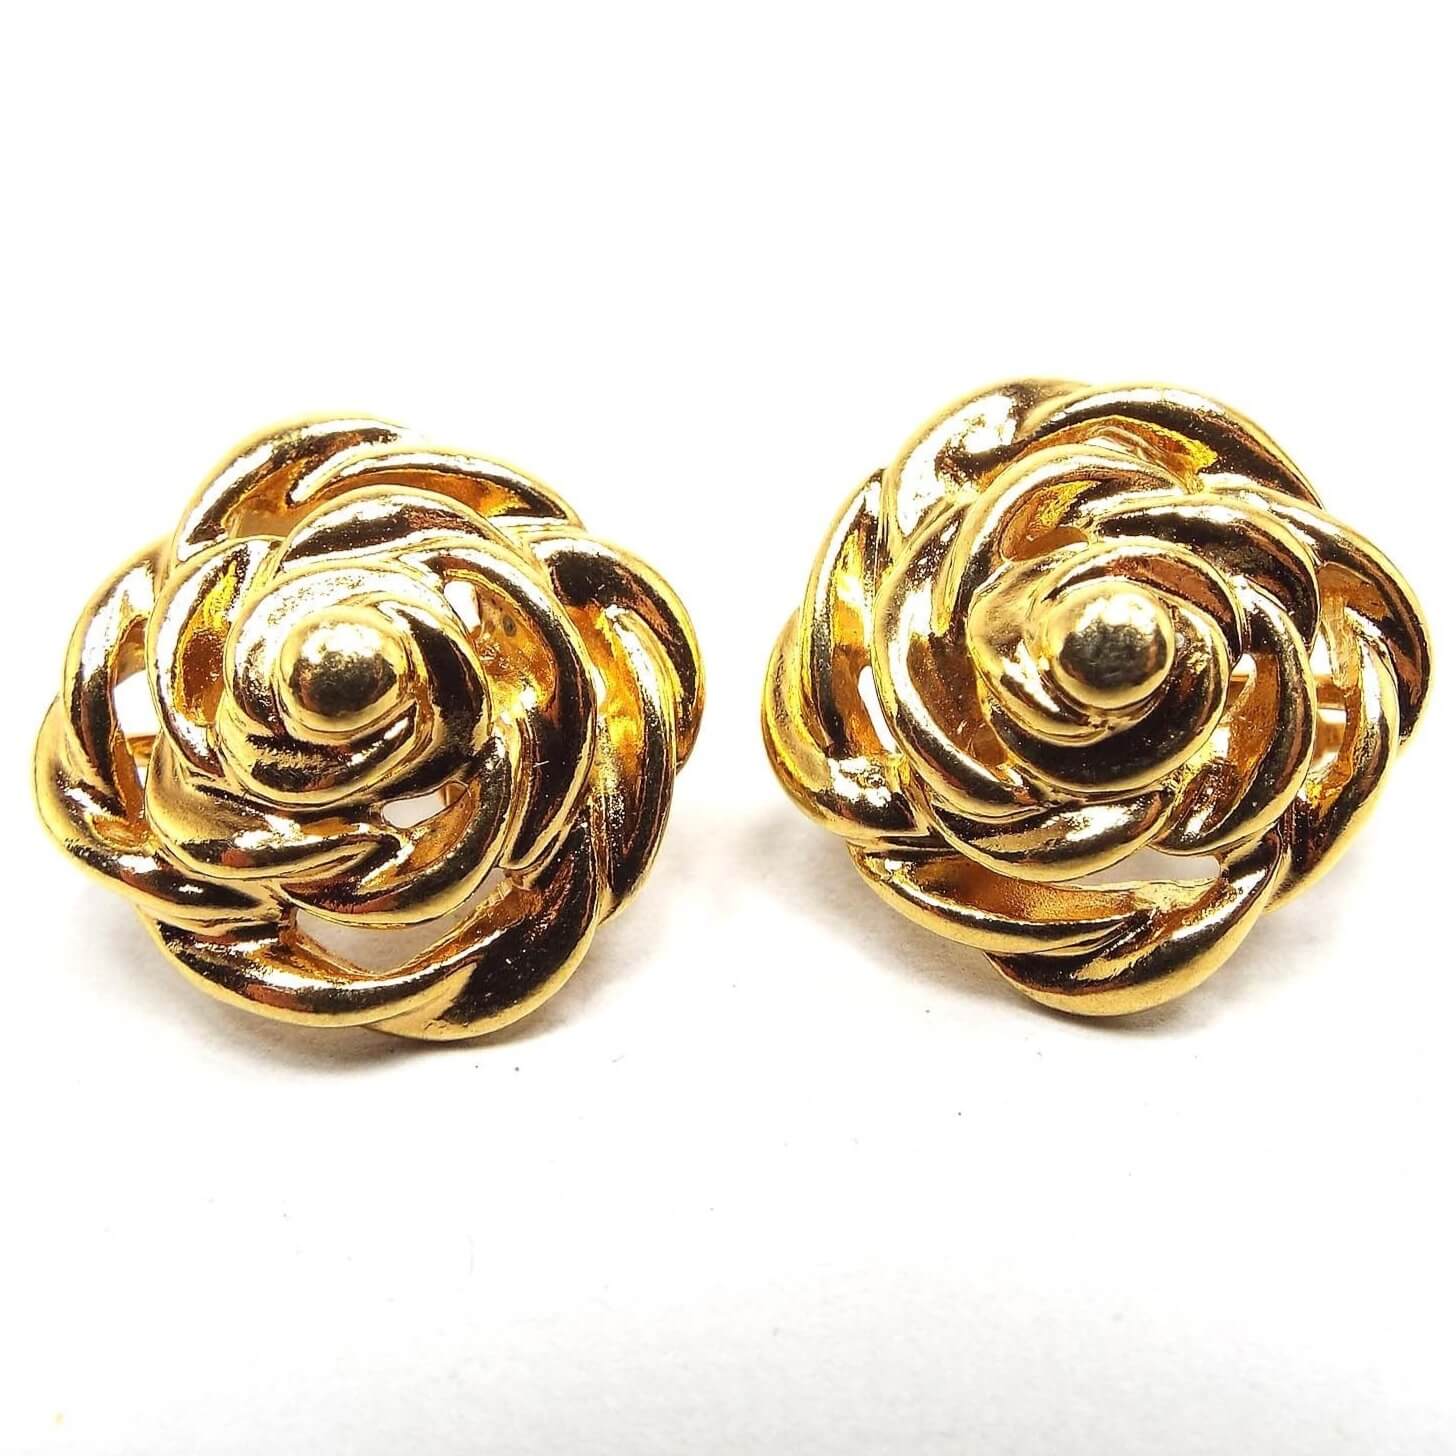 Front view of the retro vintage swirl earrings. They are gold tone in color and have a swirled and curved flower like design.